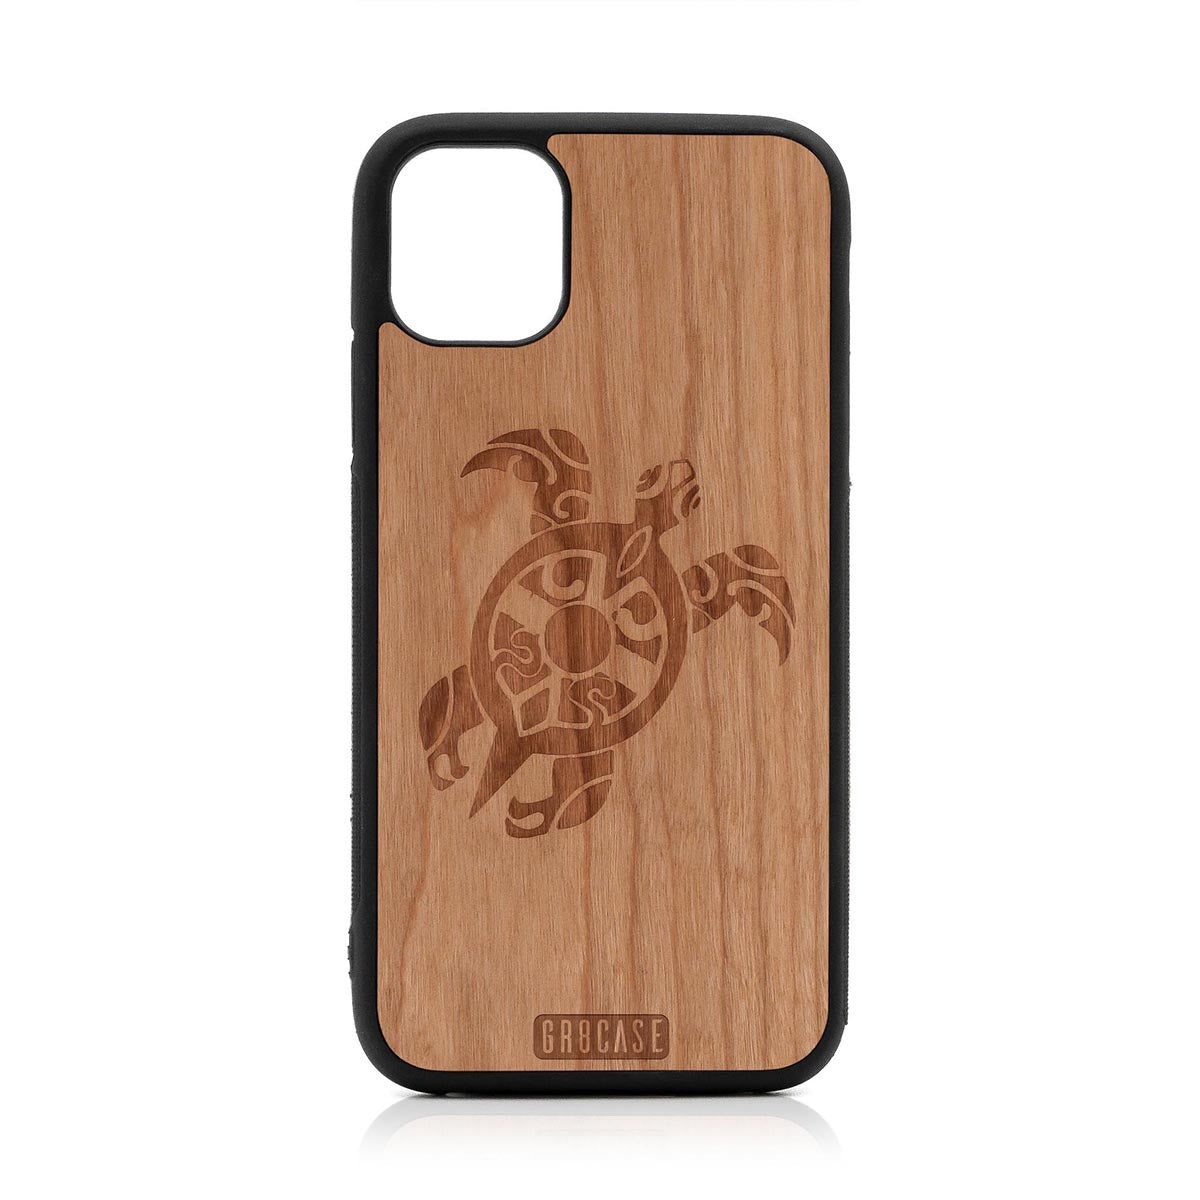 Turtle Design Wood Case For iPhone 11